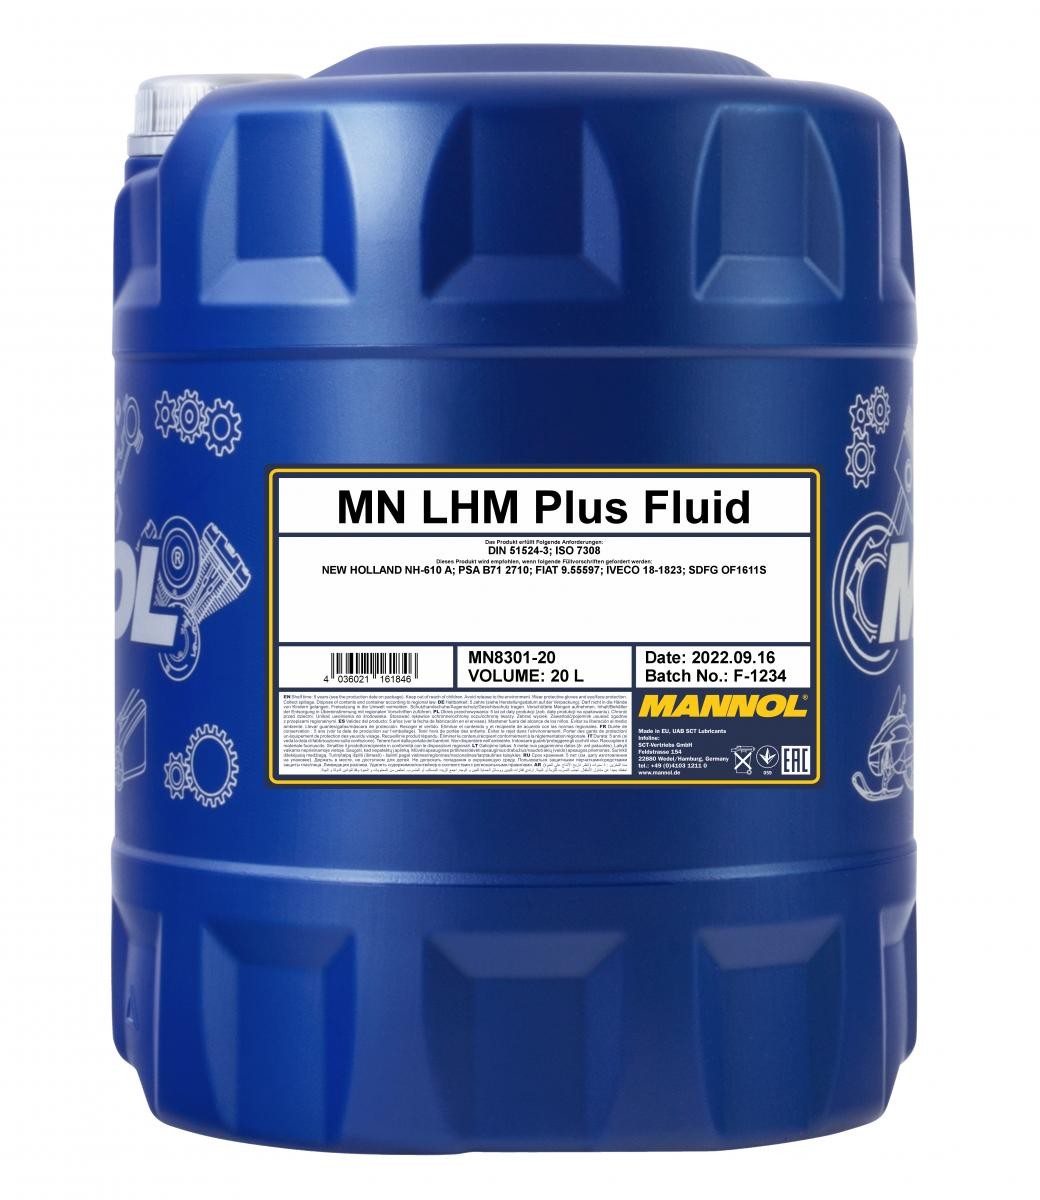 Original MN8301-20 MANNOL Hydraulic oil experience and price